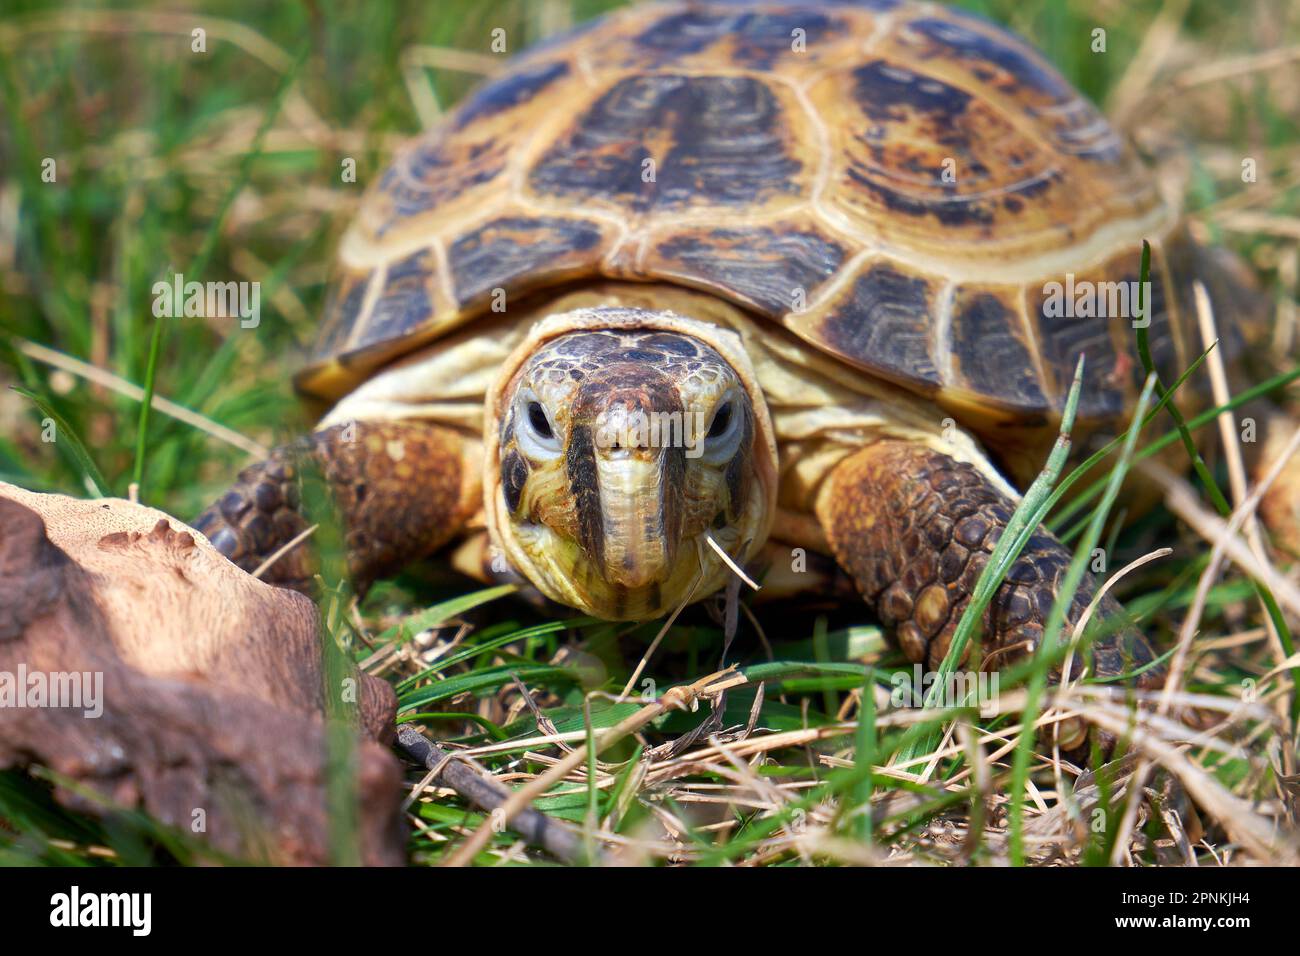 Russian tortoise in green grass close up Stock Photo